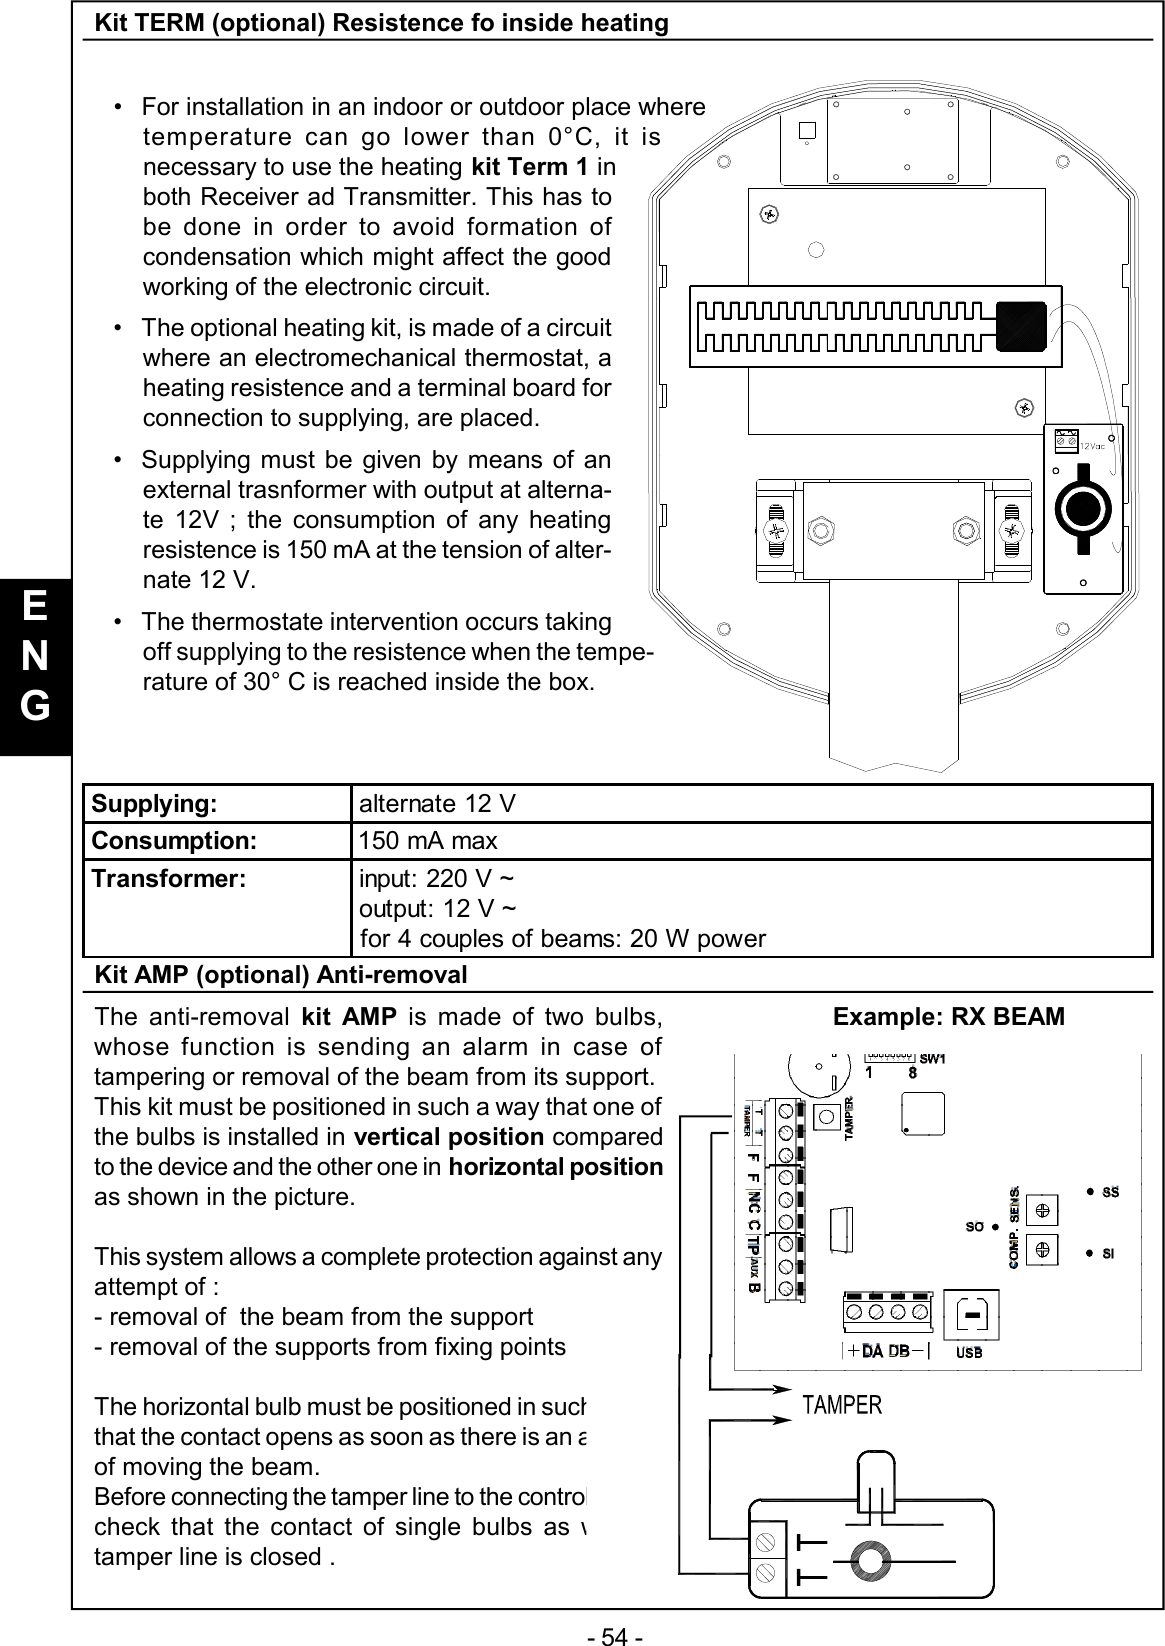 - 54 -Kit TERM (optional) Resistence fo inside heating•For installation in an indoor or outdoor place wheretemperature can go lower than 0°C, it isnecessary to use the heating kit Term 1 inboth Receiver ad Transmitter. This has tobe done in order to avoid formation ofcondensation which might affect the goodworking of the electronic circuit.•The optional heating kit, is made of a circuitwhere an electromechanical thermostat, aheating resistence and a terminal board forconnection to supplying, are placed.•Supplying must be given by means of anexternal trasnformer with output at alterna-te 12V ; the consumption of any heatingresistence is 150 mA at the tension of alter-nate 12 V.•The thermostate intervention occurs takingoff supplying to the resistence when the tempe-rature of 30° C is reached inside the box.Kit AMP (optional) Anti-removalThe anti-removal  kit AMP is made of two bulbs,whose function is sending an alarm in case oftampering or removal of the beam from its support.This kit must be positioned in such a way that one ofthe bulbs is installed in vertical position comparedto the device and the other one in horizontal positionas shown in the picture.This system allows a complete protection against anyattempt of :- removal of  the beam from the support- removal of the supports from fixing pointsThe horizontal bulb must be positioned in such a waythat the contact opens as soon as there is an attemptof moving the beam.Before connecting the tamper line to the control panel,check that the contact of single bulbs as well astamper line is closed .Supplying: alternate 12 VConsumption: 150 mA maxTransformer: input: 220 V ~output: 12 V ~for 4 couples of beams: 20 W powerExample: RX BEAMENG